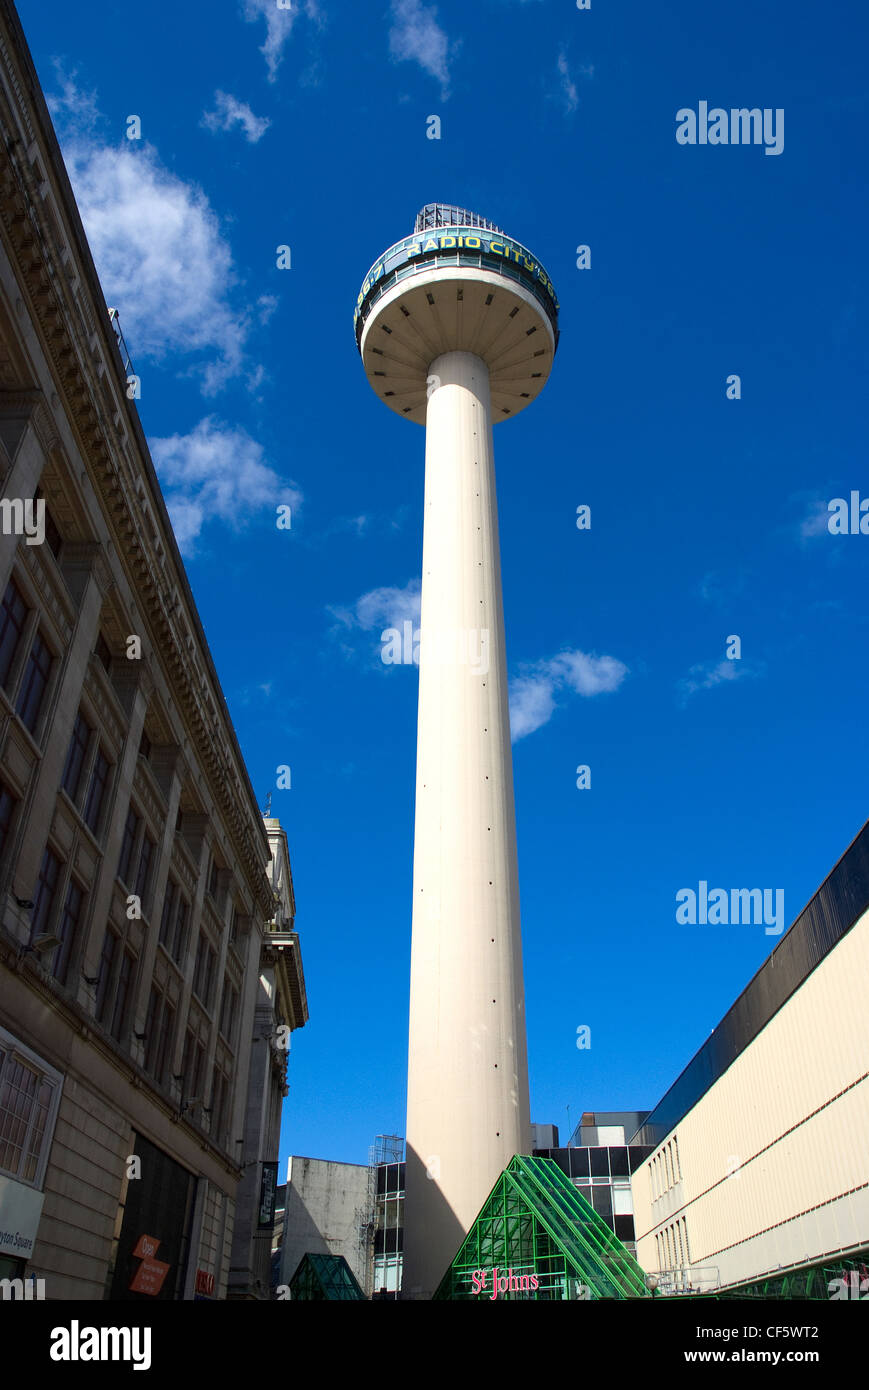 Radio City Tower, built in 1965 and originally called St John's Beacon. It used to house a rotating restaurant but is now open t Stock Photo